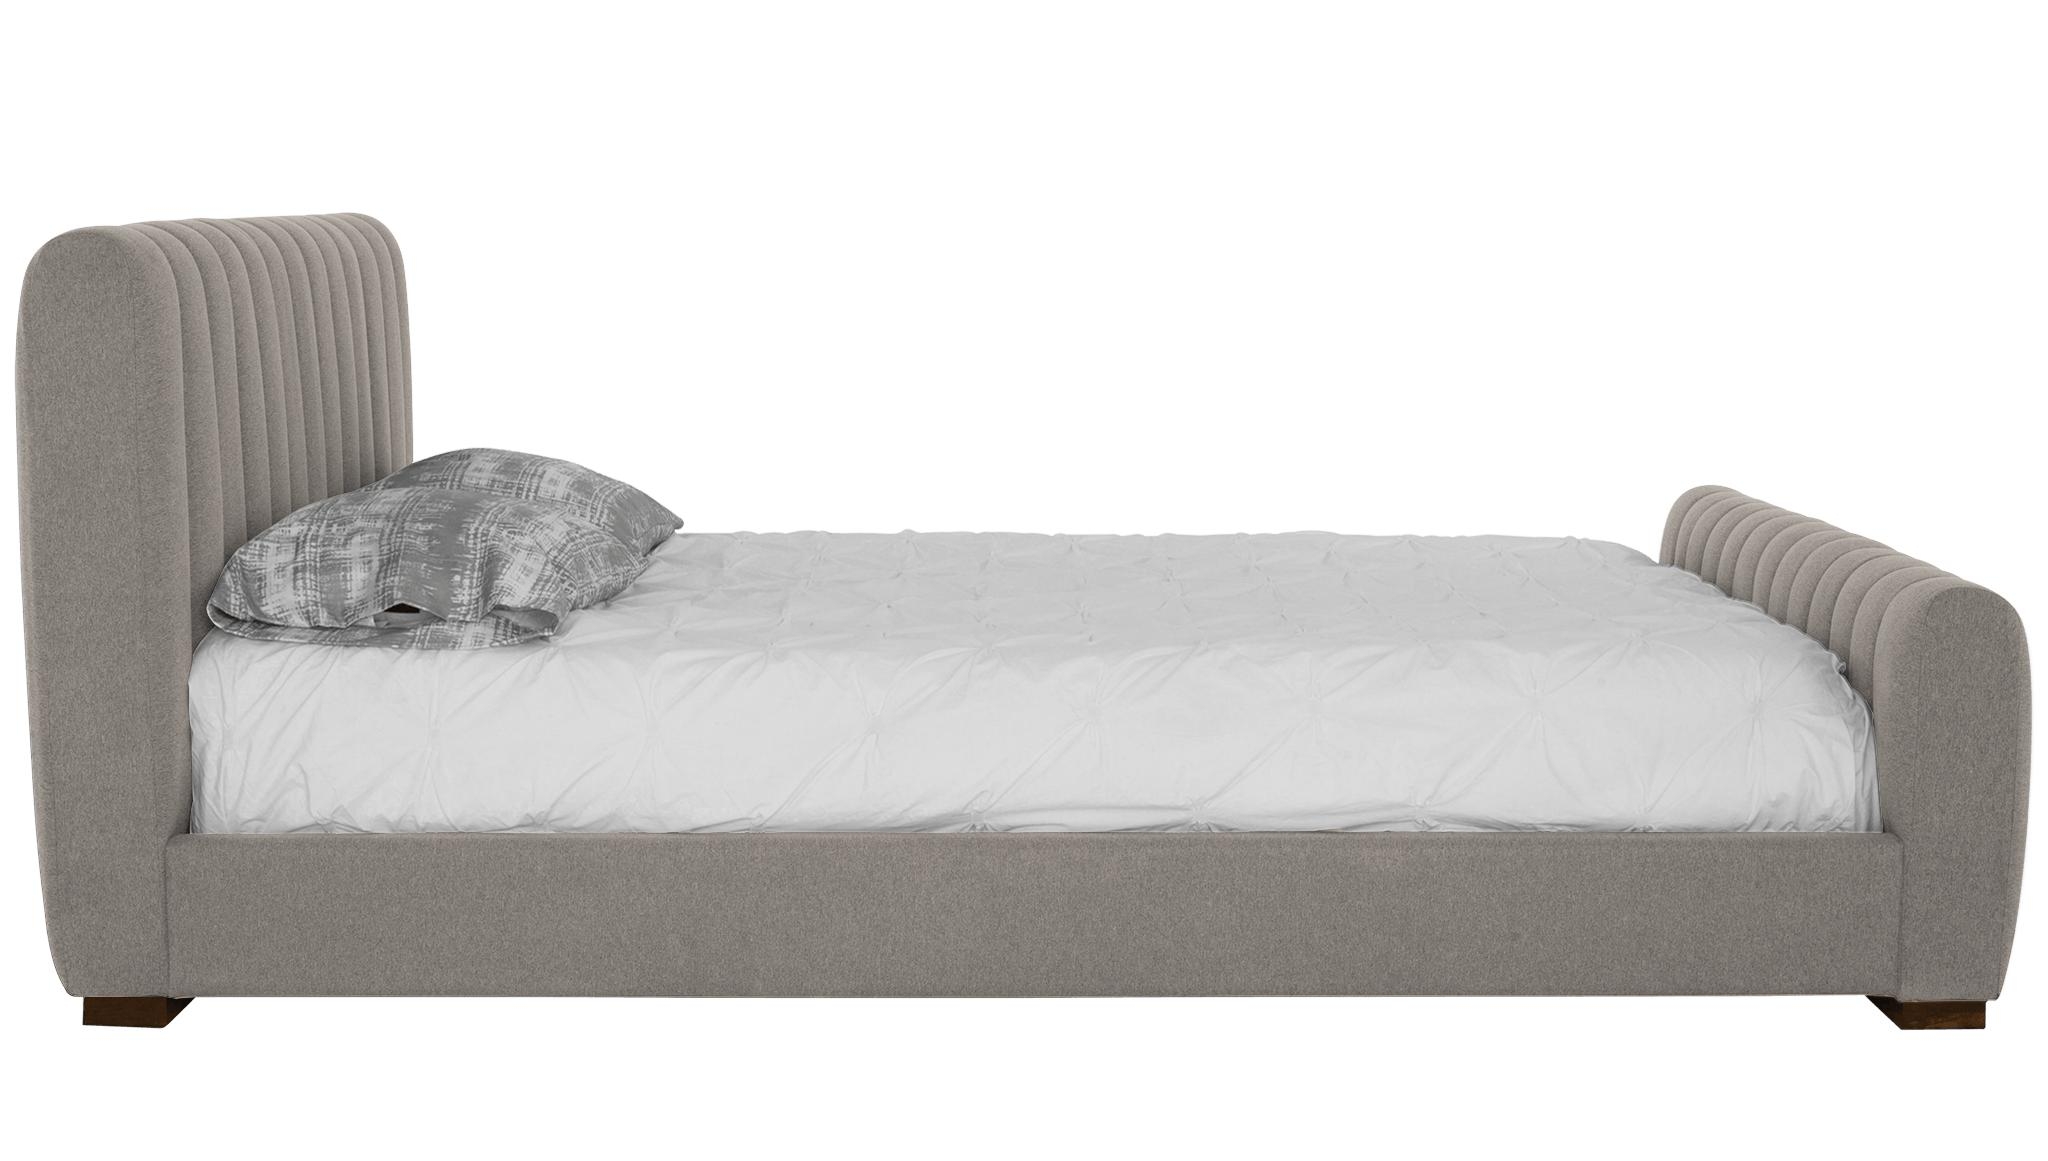 Gray Camille Mid Century Modern Bed - Prime Stone - Mocha - Eastern King - Image 2